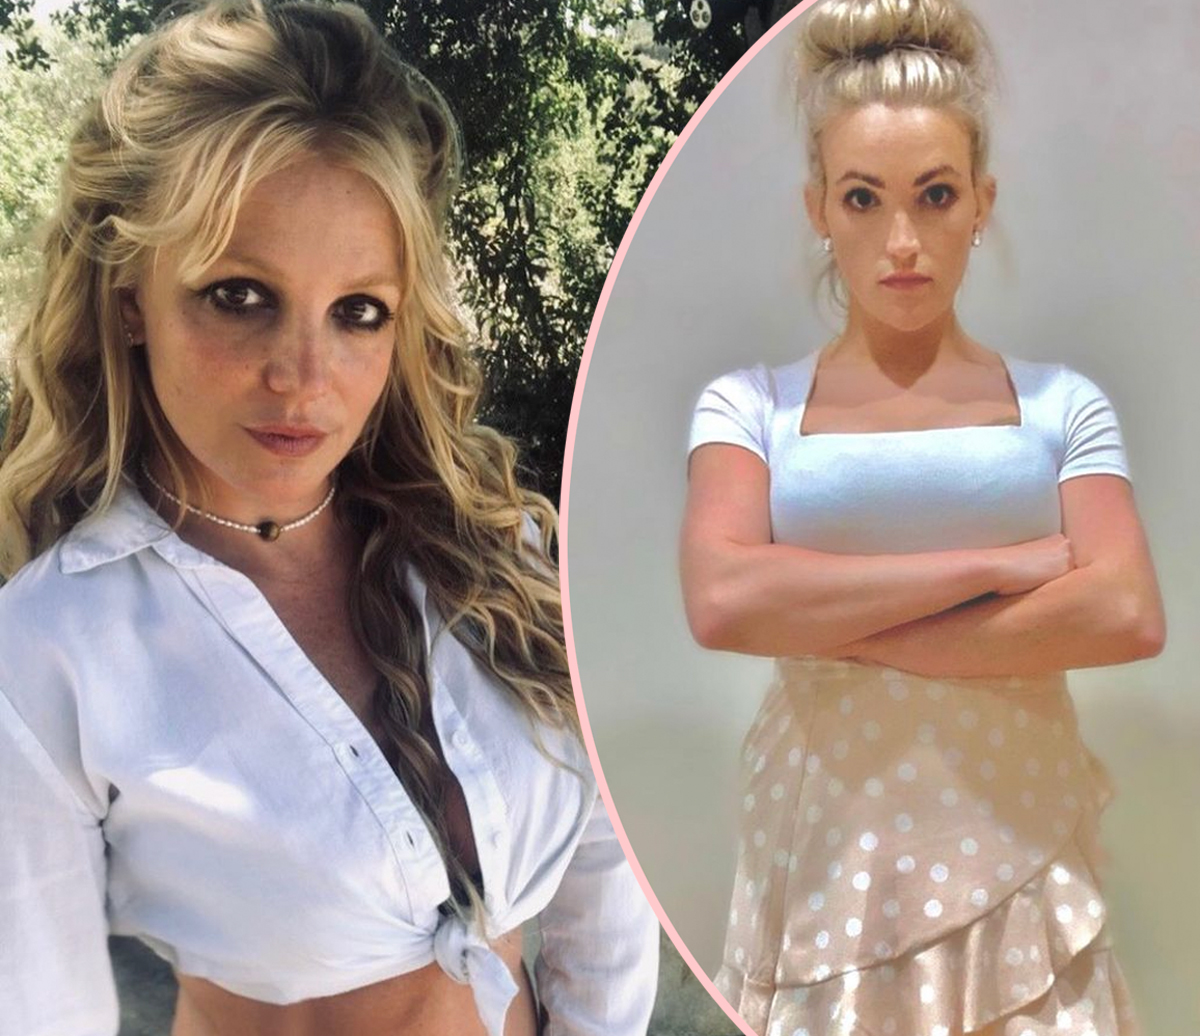 #Britney Spears Slams Jamie Lynn For Allegedly Lying To Make Her Look Bad In Scathing New Post!